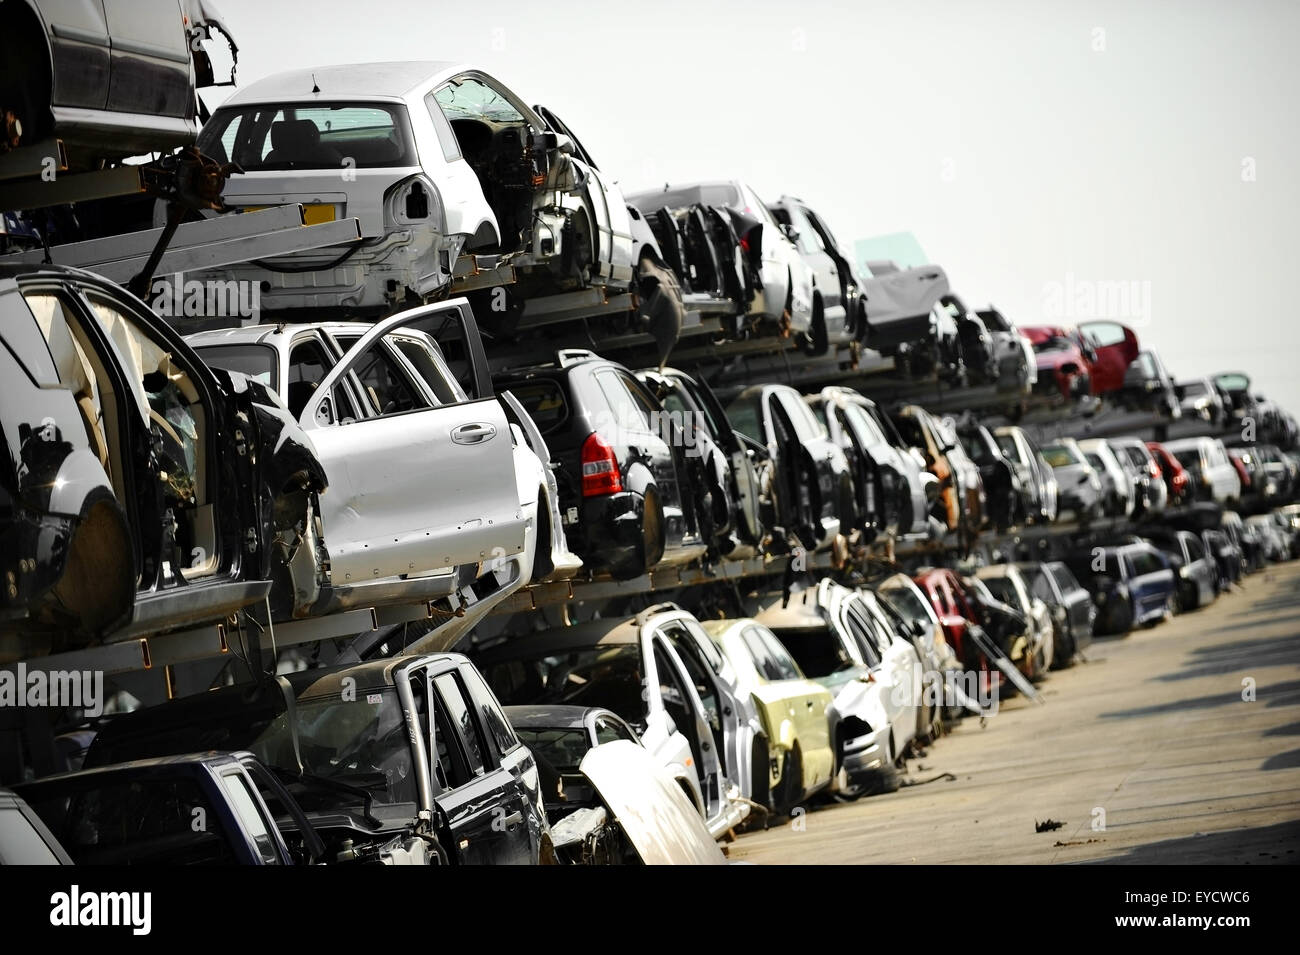 Wrecked vehicles are seen in a car junkyard Stock Photo